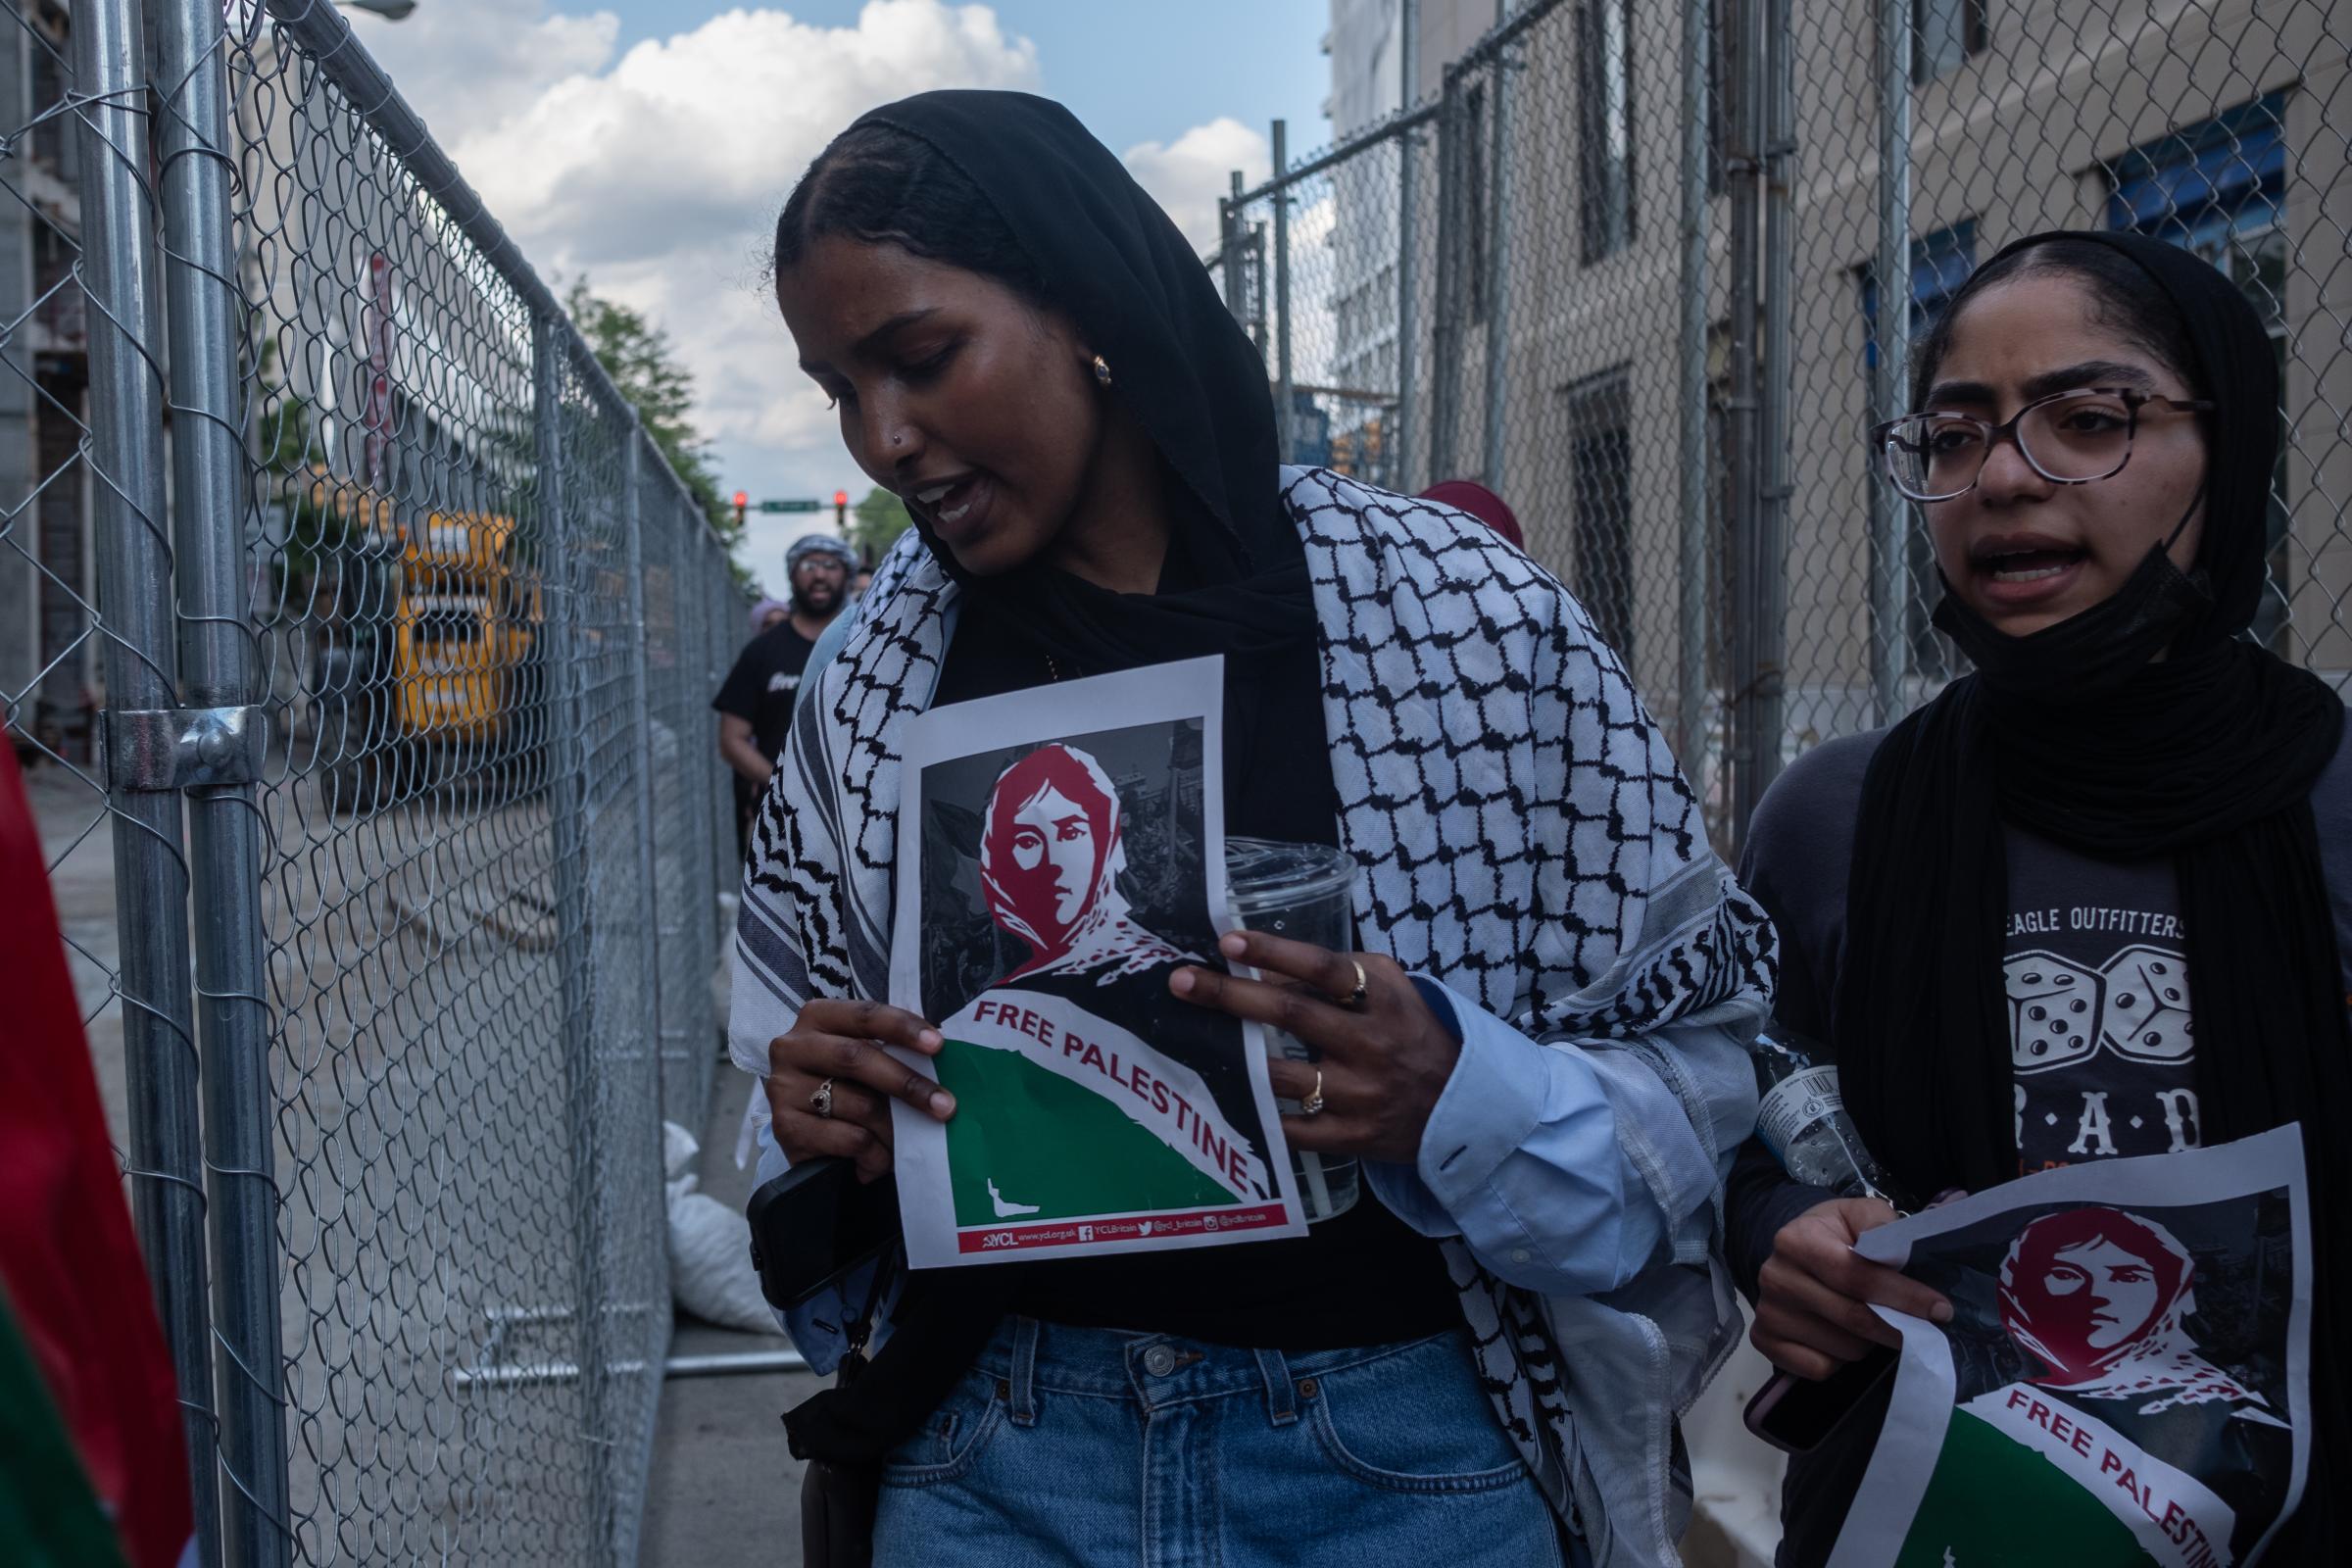 Protesters support of Palestine - 